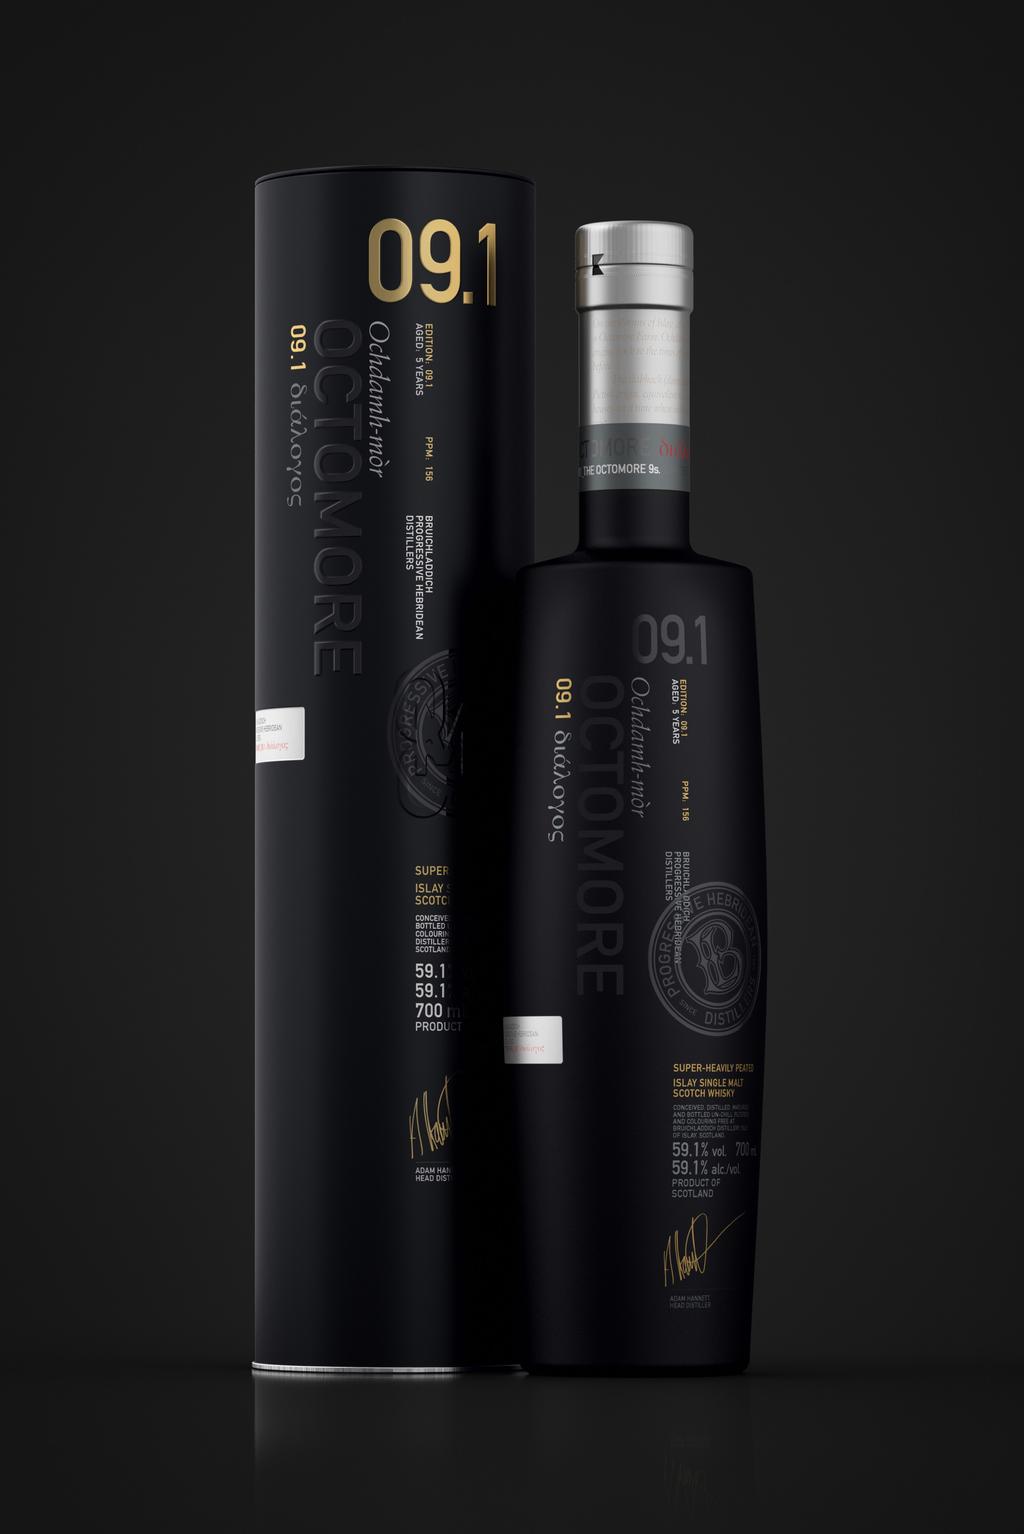 EDITION: 09.1 PPM: 156 AGED: 5 YEARS 100% AMERICAN OAK MATURATION. 09.1 διάλογος THE CONTROL. Octomore 09.1 questions the fundamentals of superior single malt Scotch.